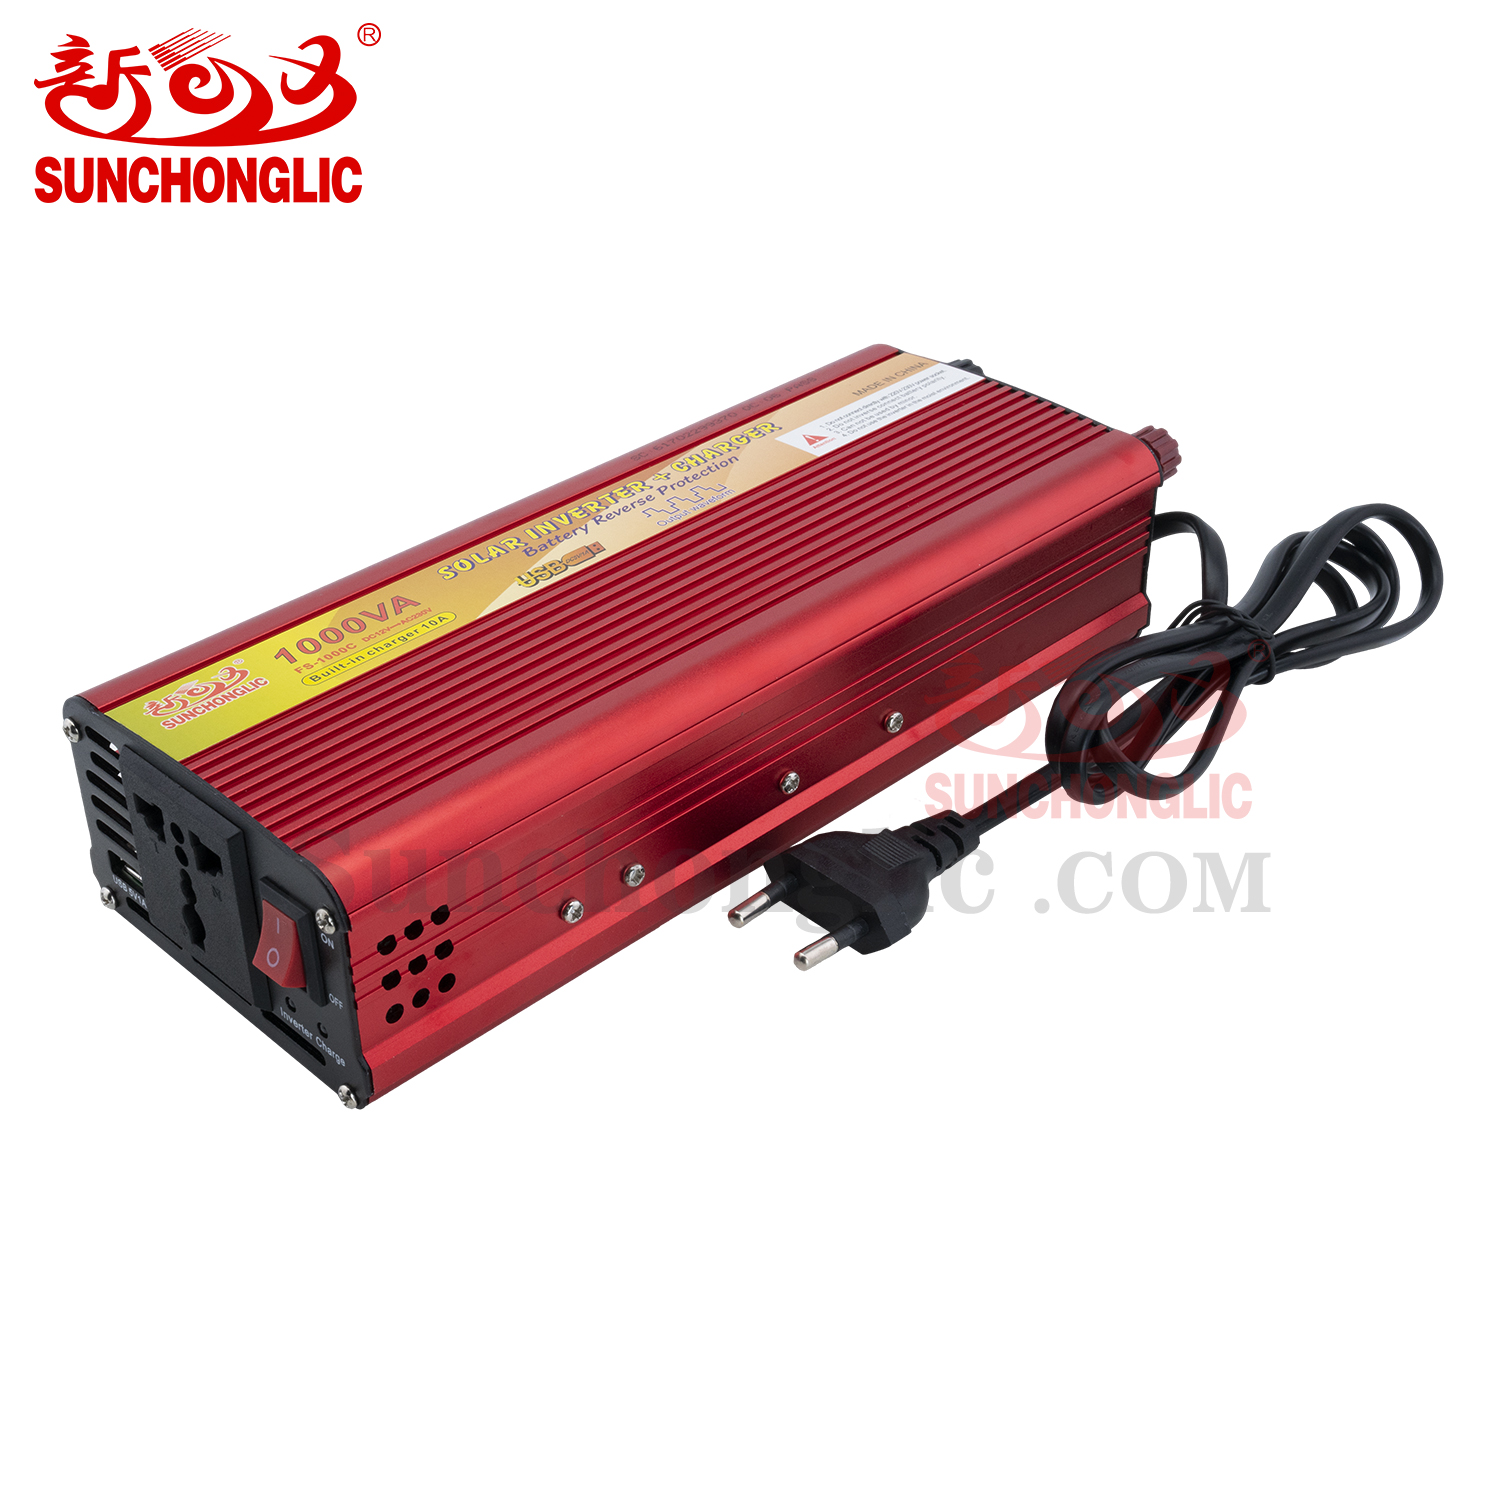 Inverter With Charger - FS-1000C